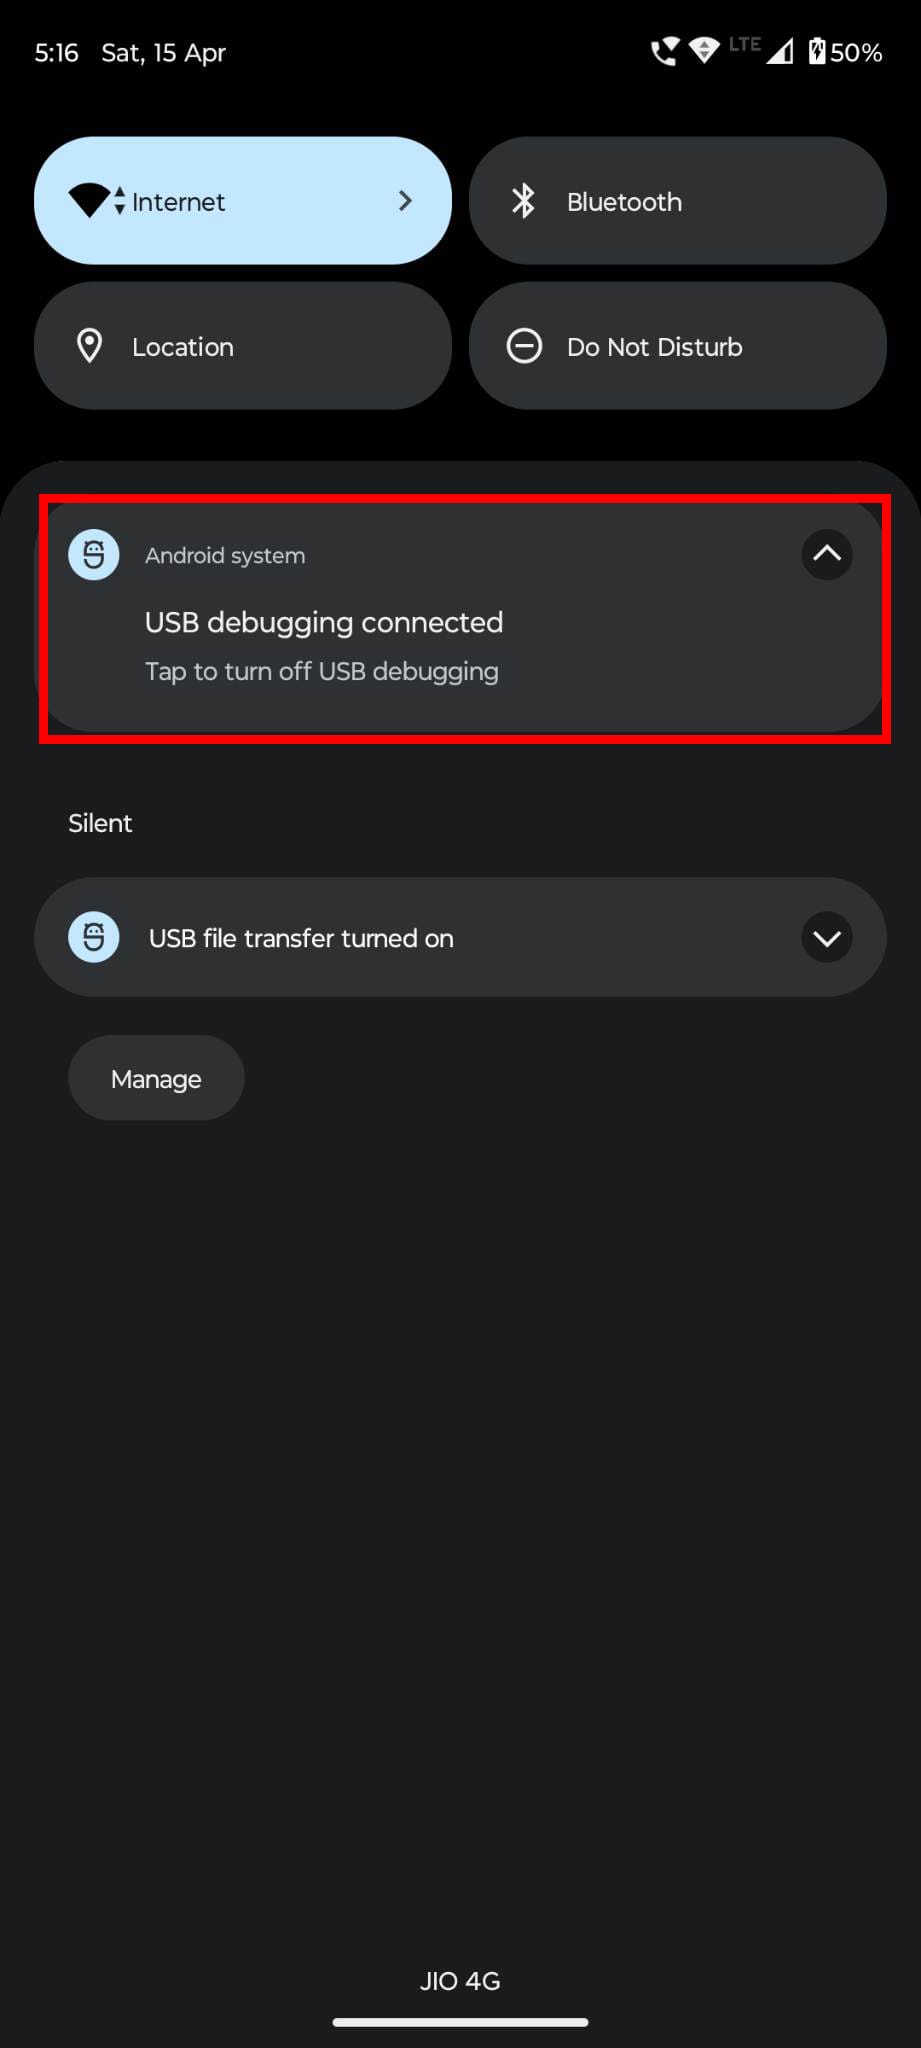 USB debugging connected confirmation